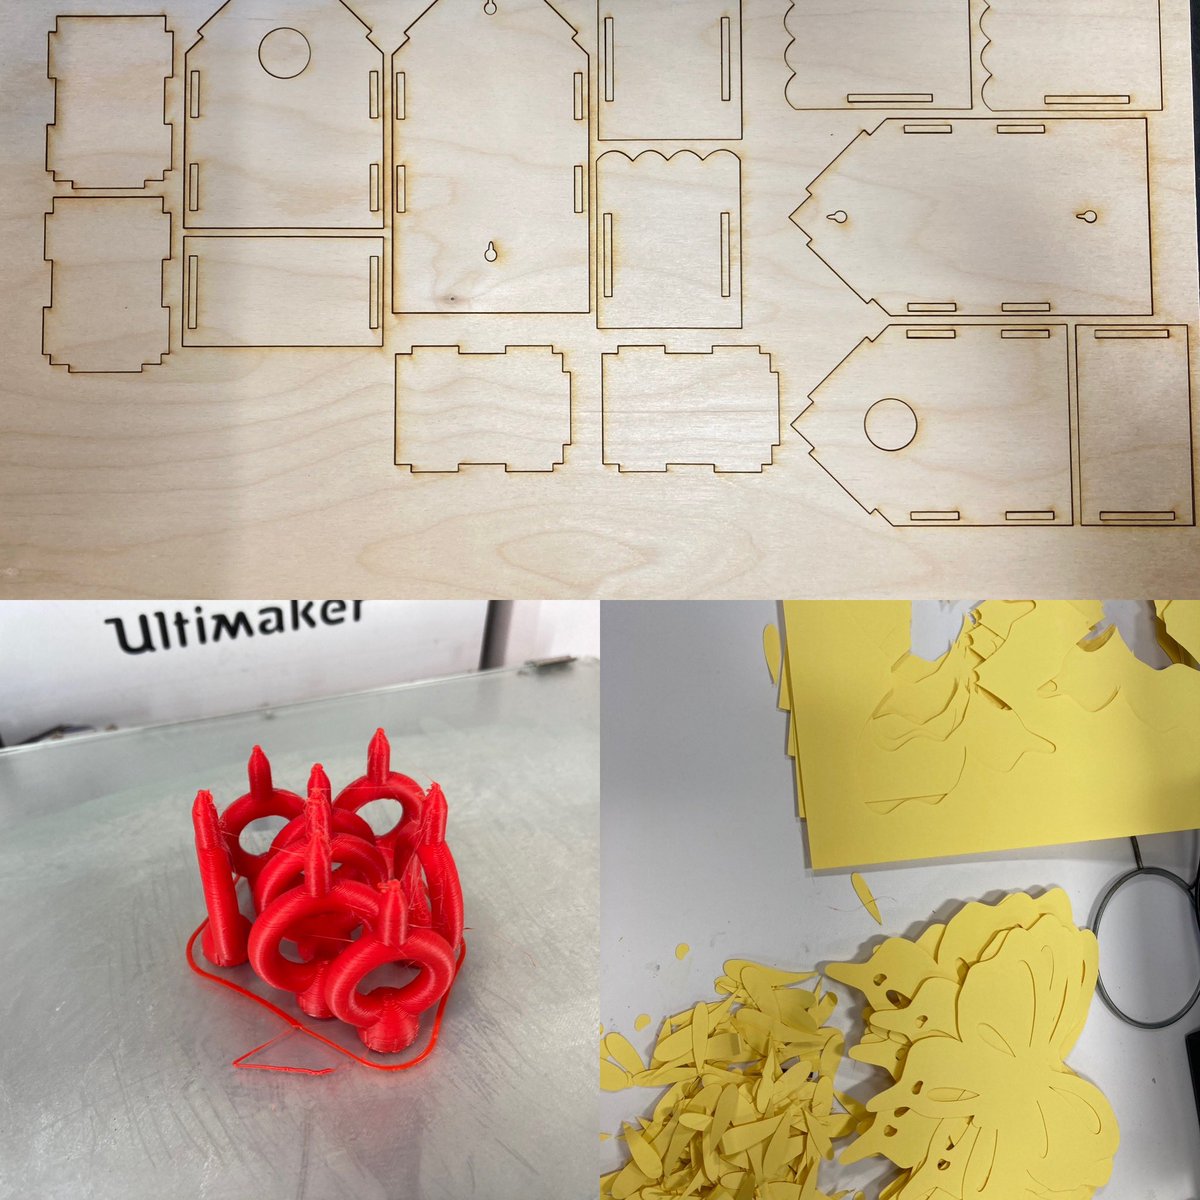 A day in the life
#MakerEd
Butterflies (cricut)
Cardboard tool (3D printing)
Birdhouse models (laser)